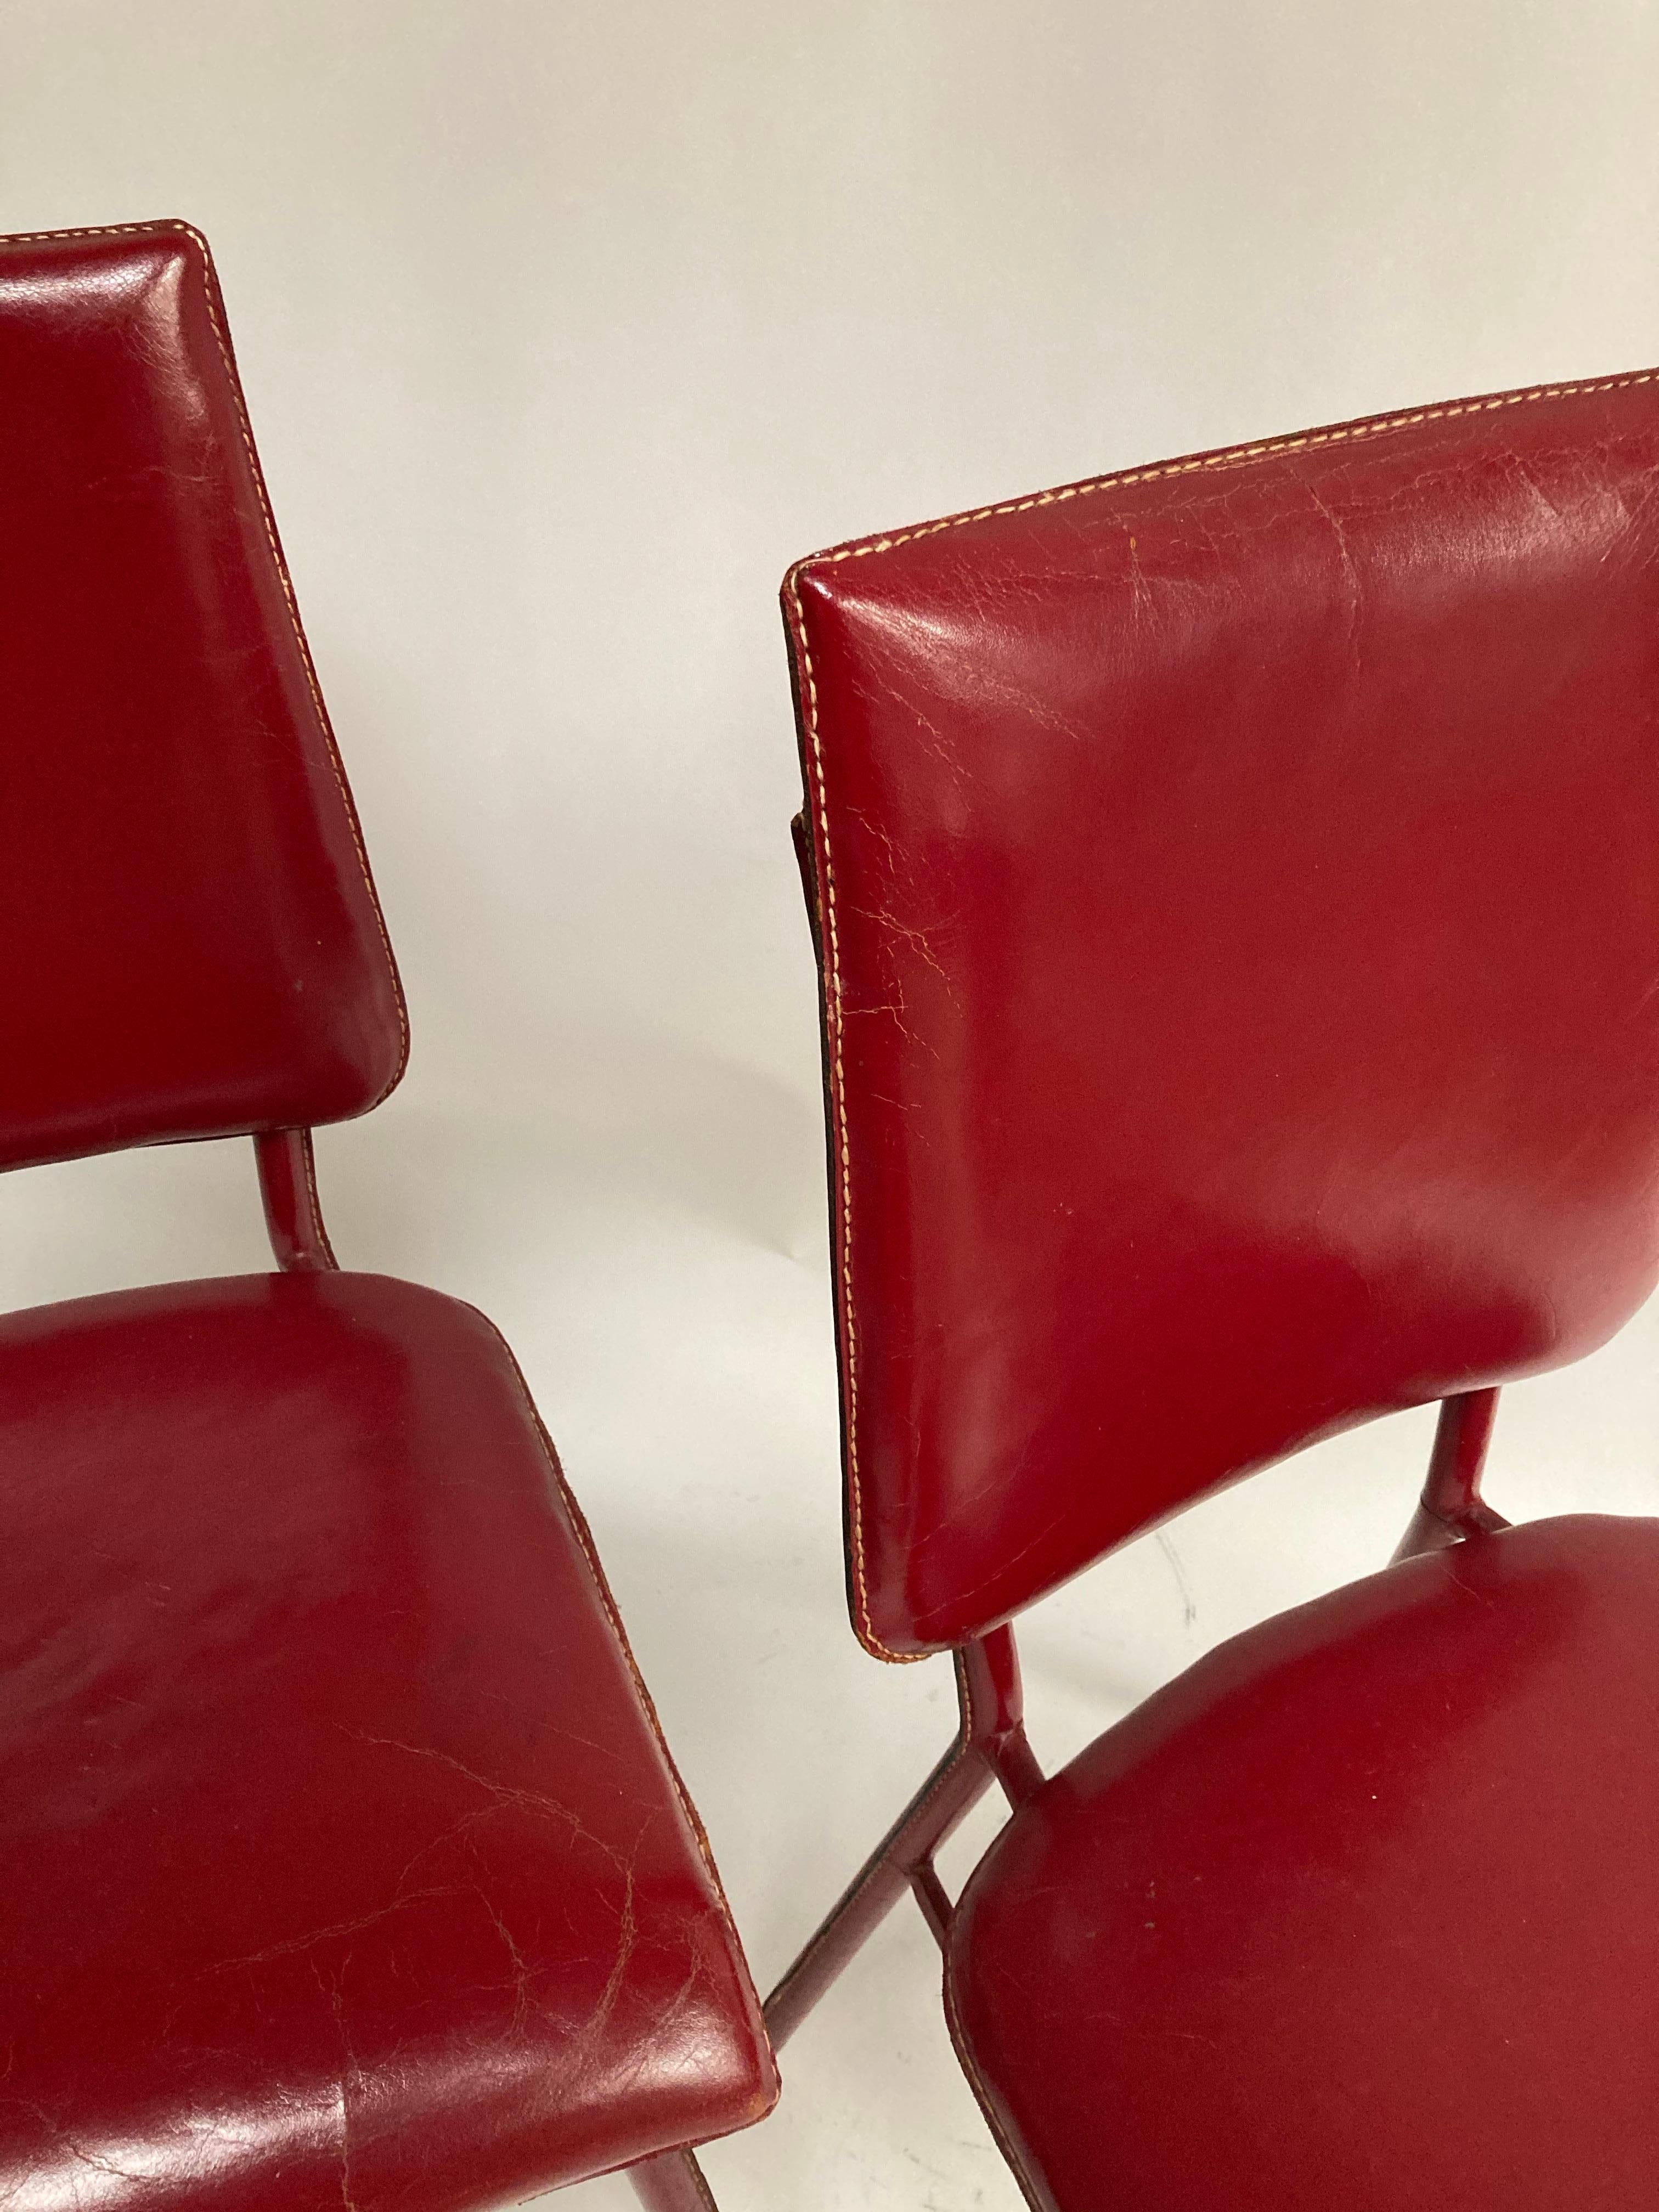 Pair of 1950's red stitched leather chairs by Jacques Adnet
France.